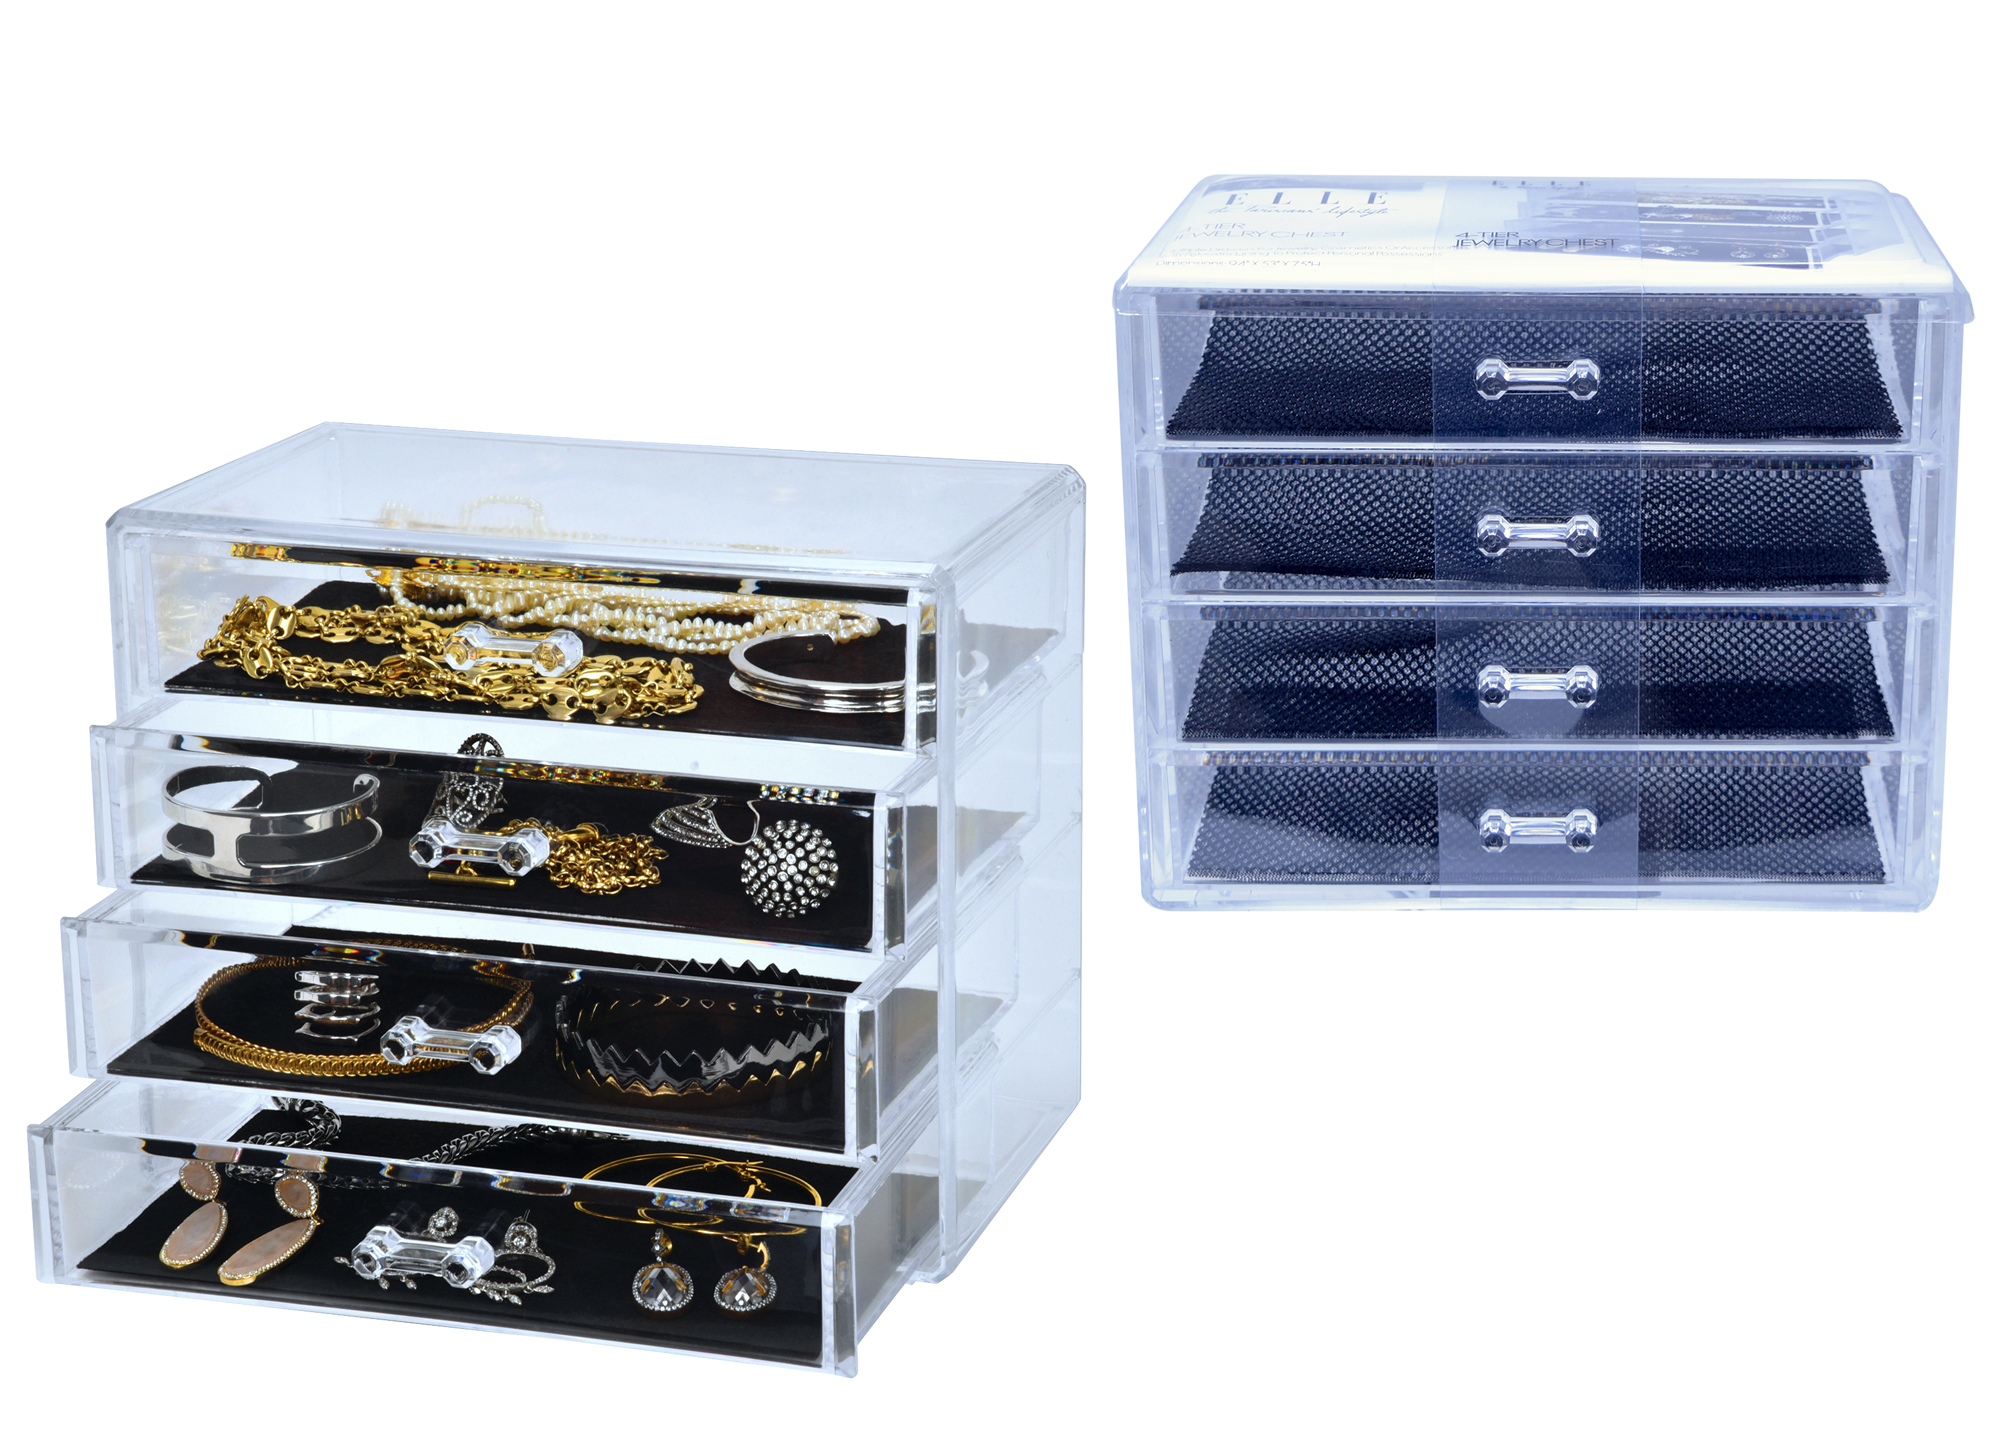 ELLE The Parisians Lifestyle Collection 4-Drawer Clear Acrylic Jewlery Storage Case